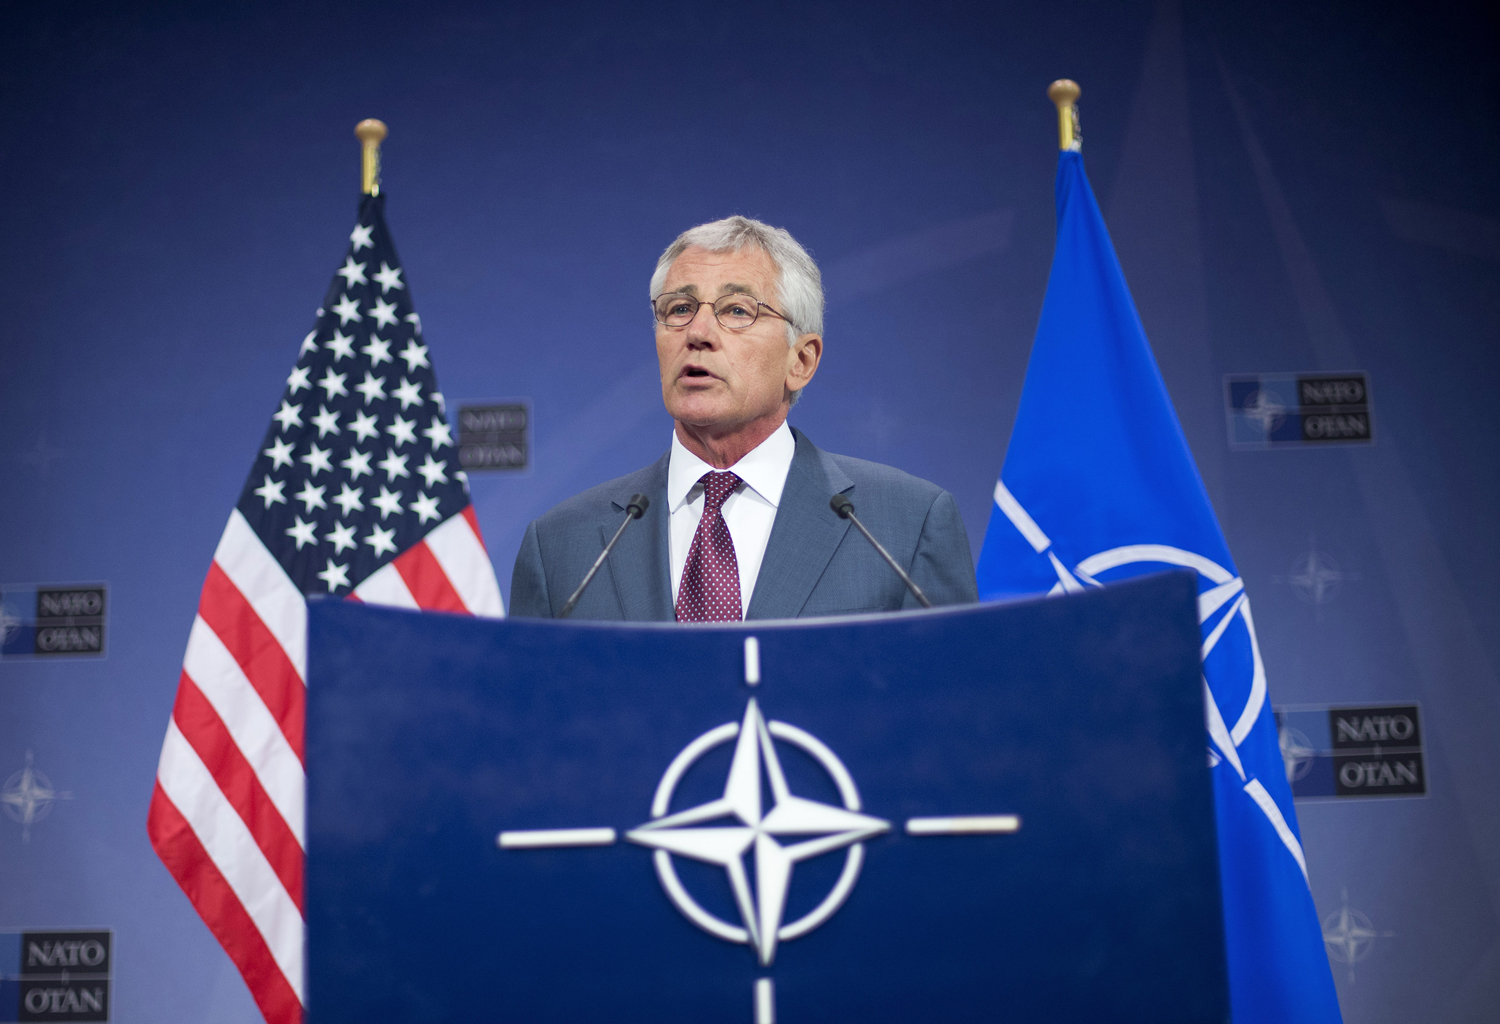 U.S. Defense Secretary Hagel speaks during a news conference at the end of a meeting of the North Atlantic Council in Brussels